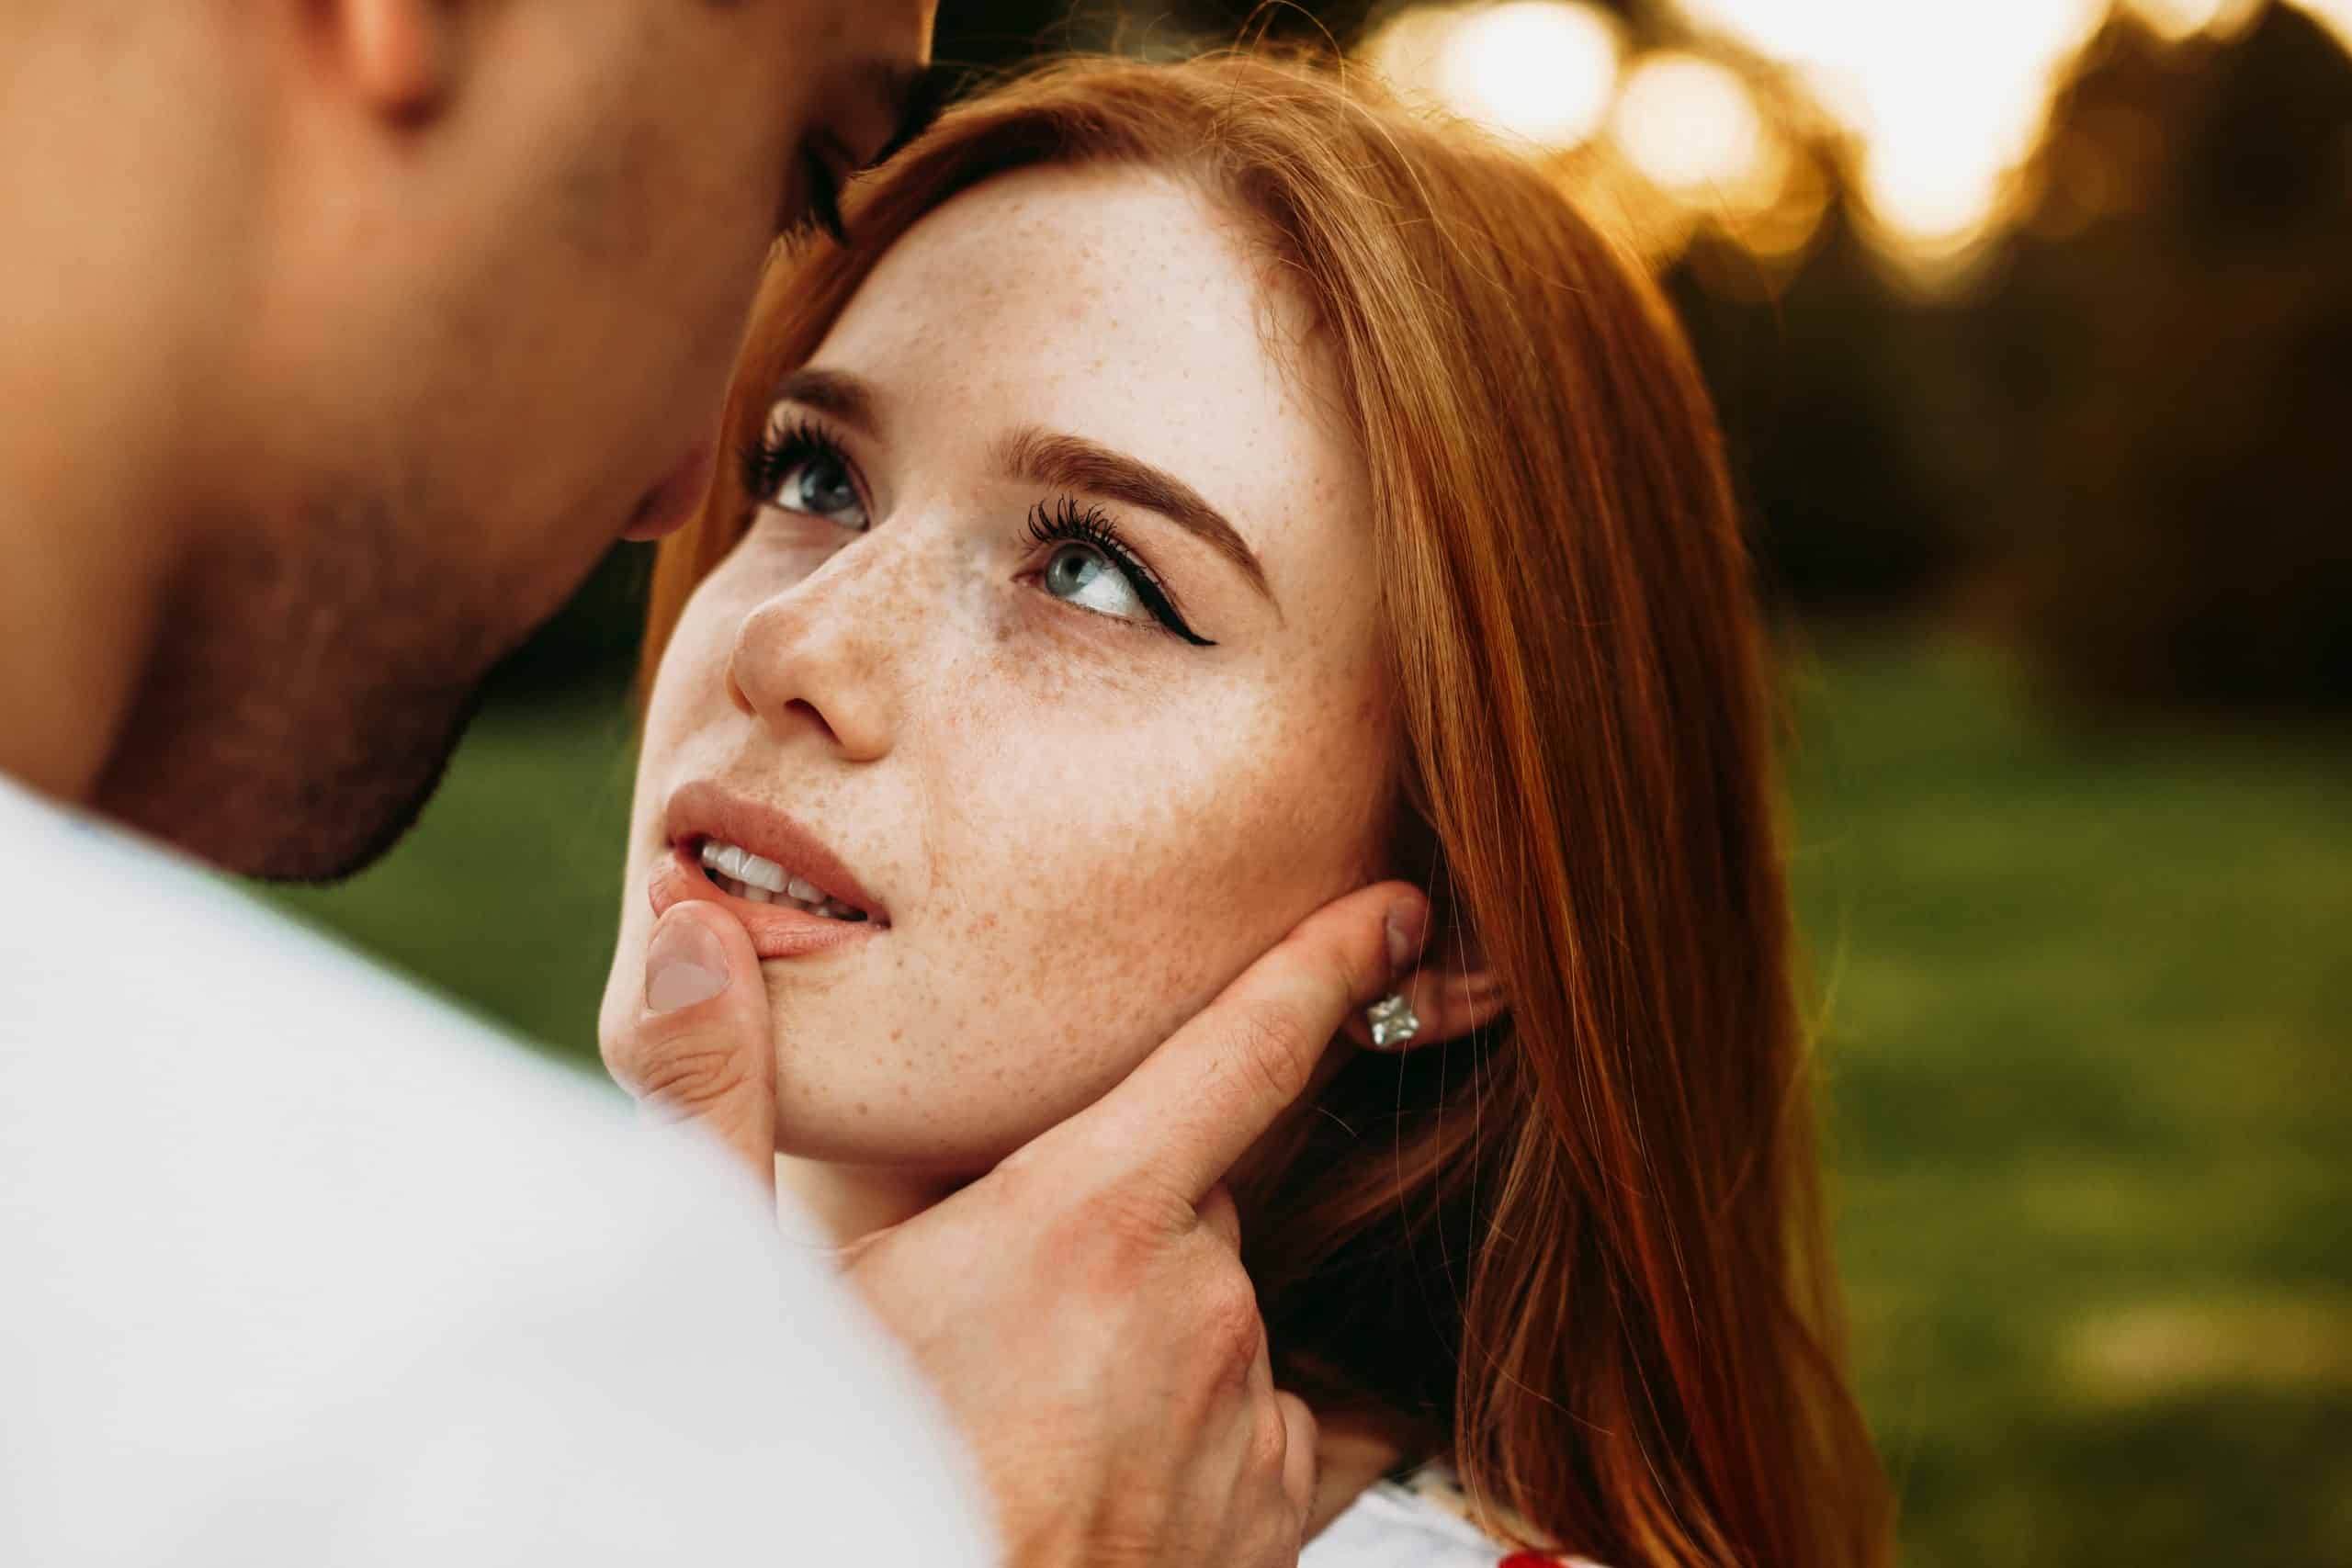 A red haired woman and green eyes looking at boyfriend touching her lips.